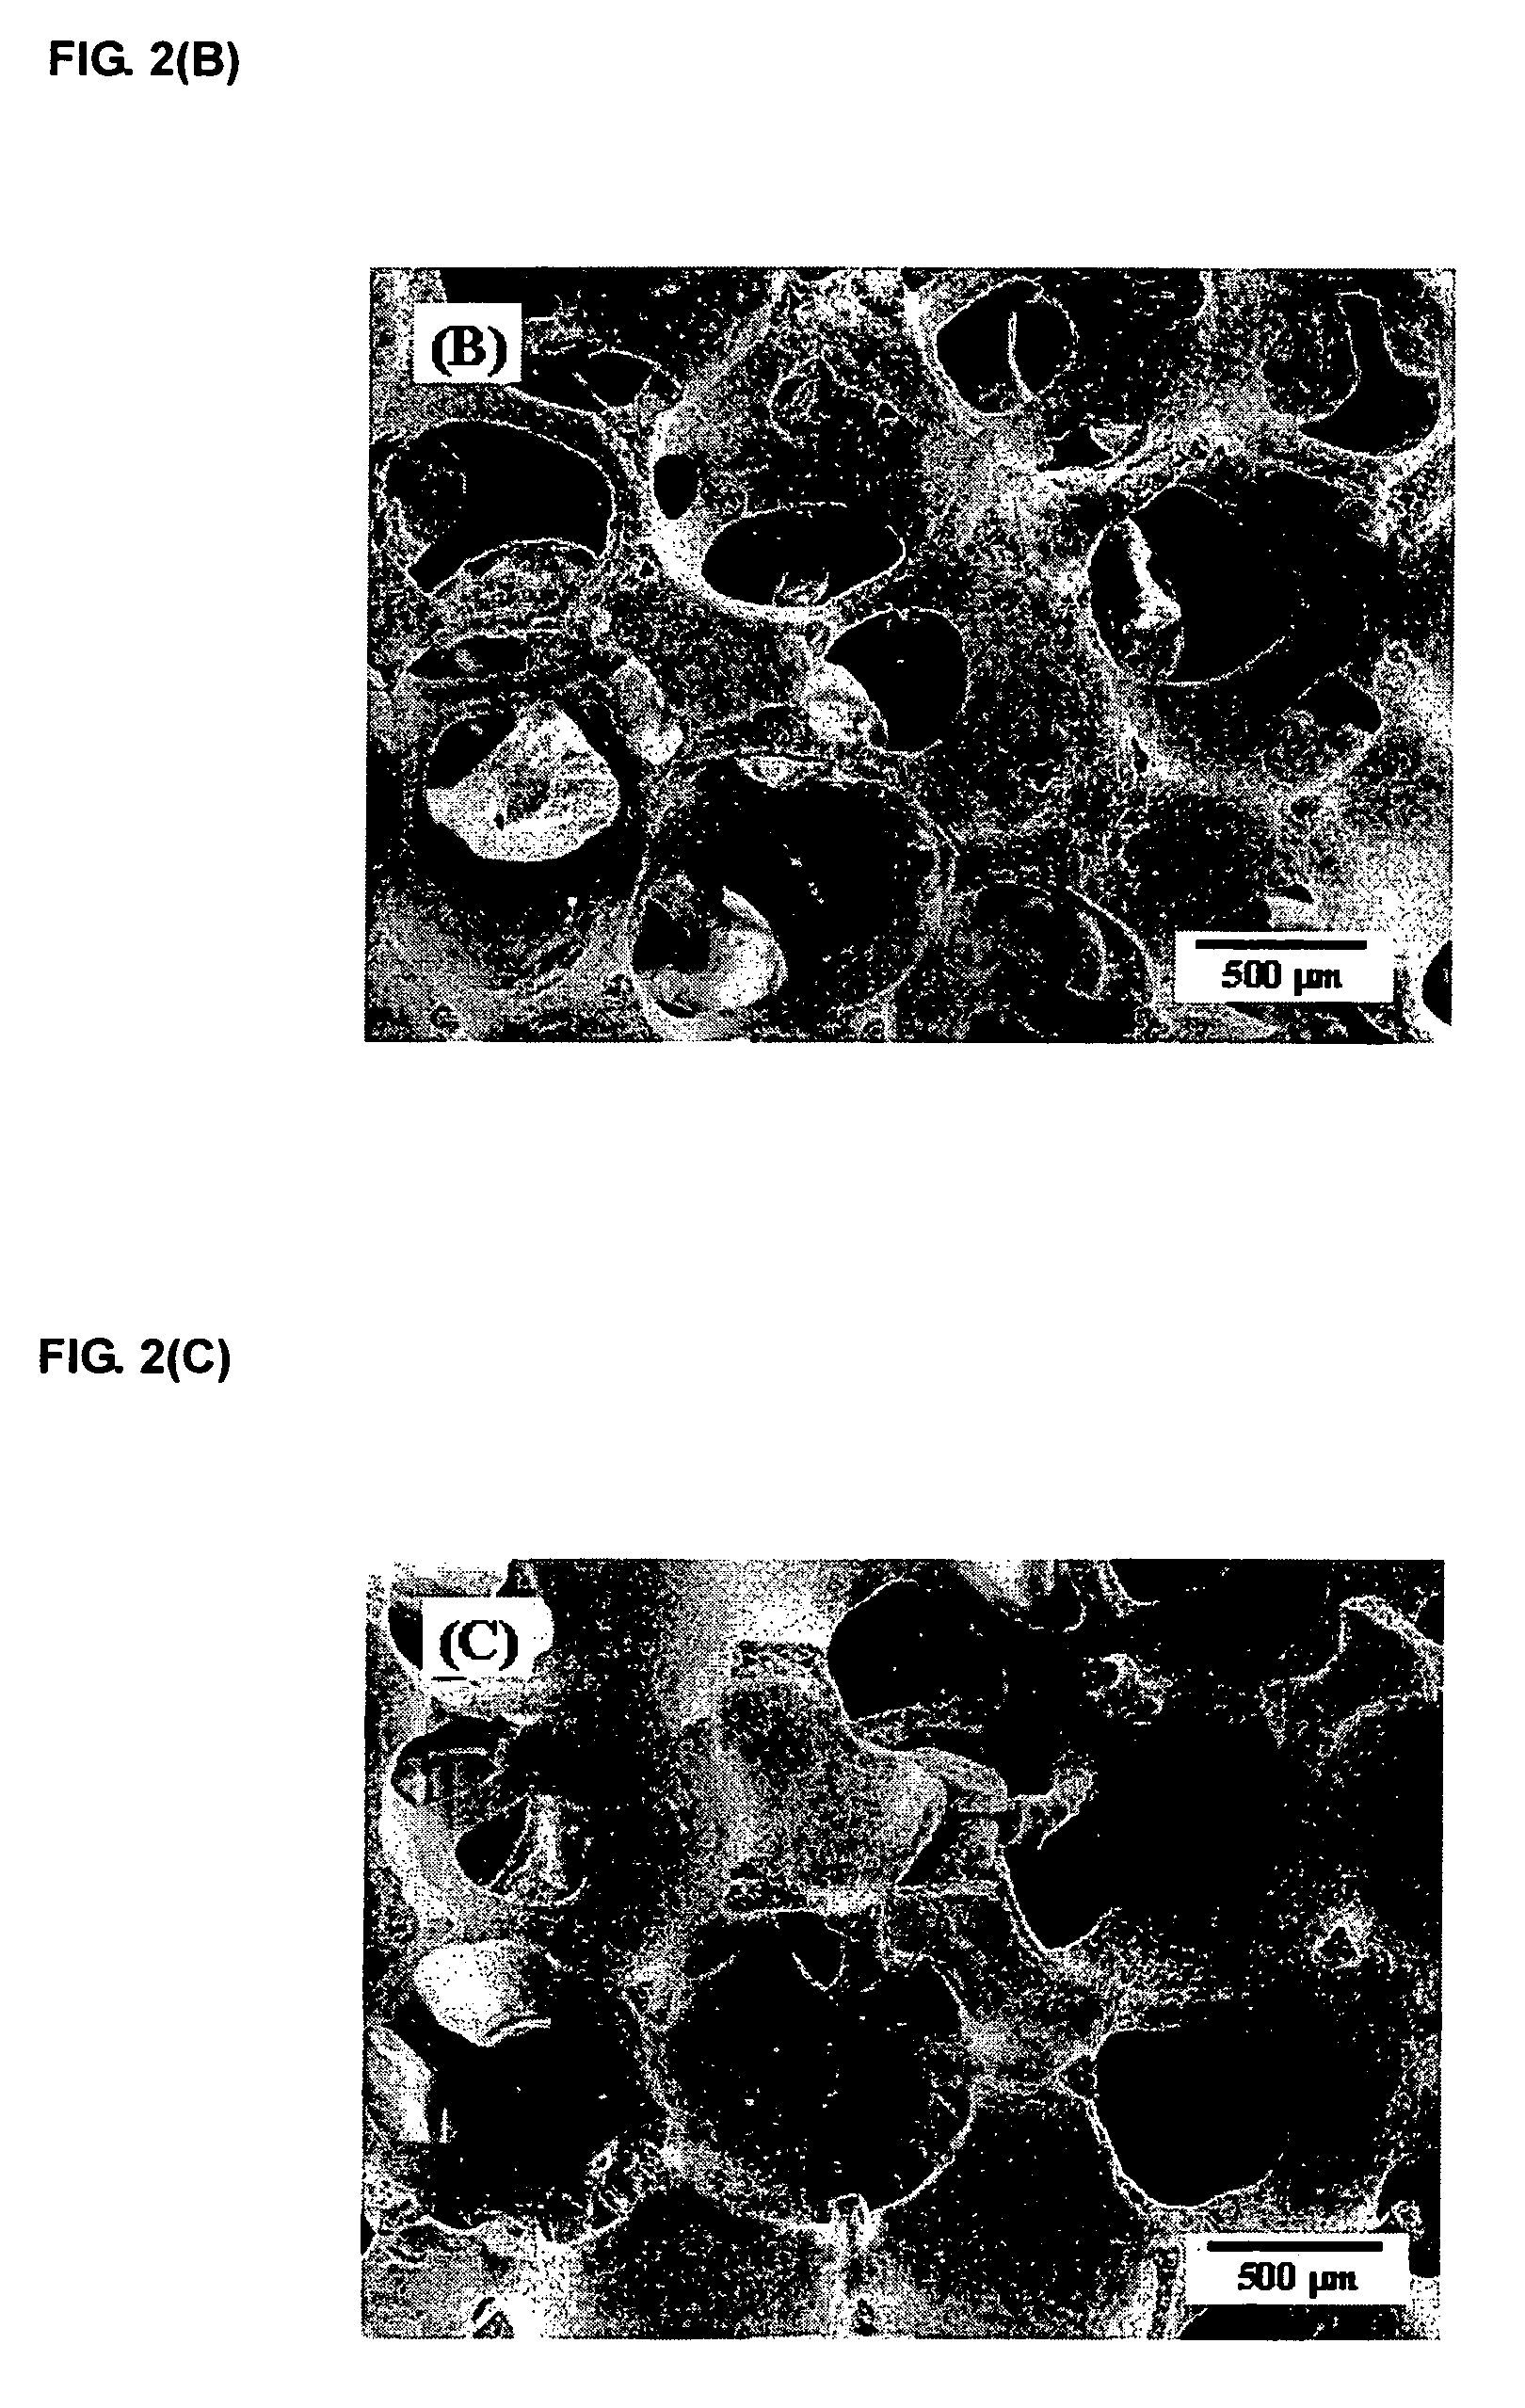 Porous bioceramics for bone scaffold and method for manufacturing the same